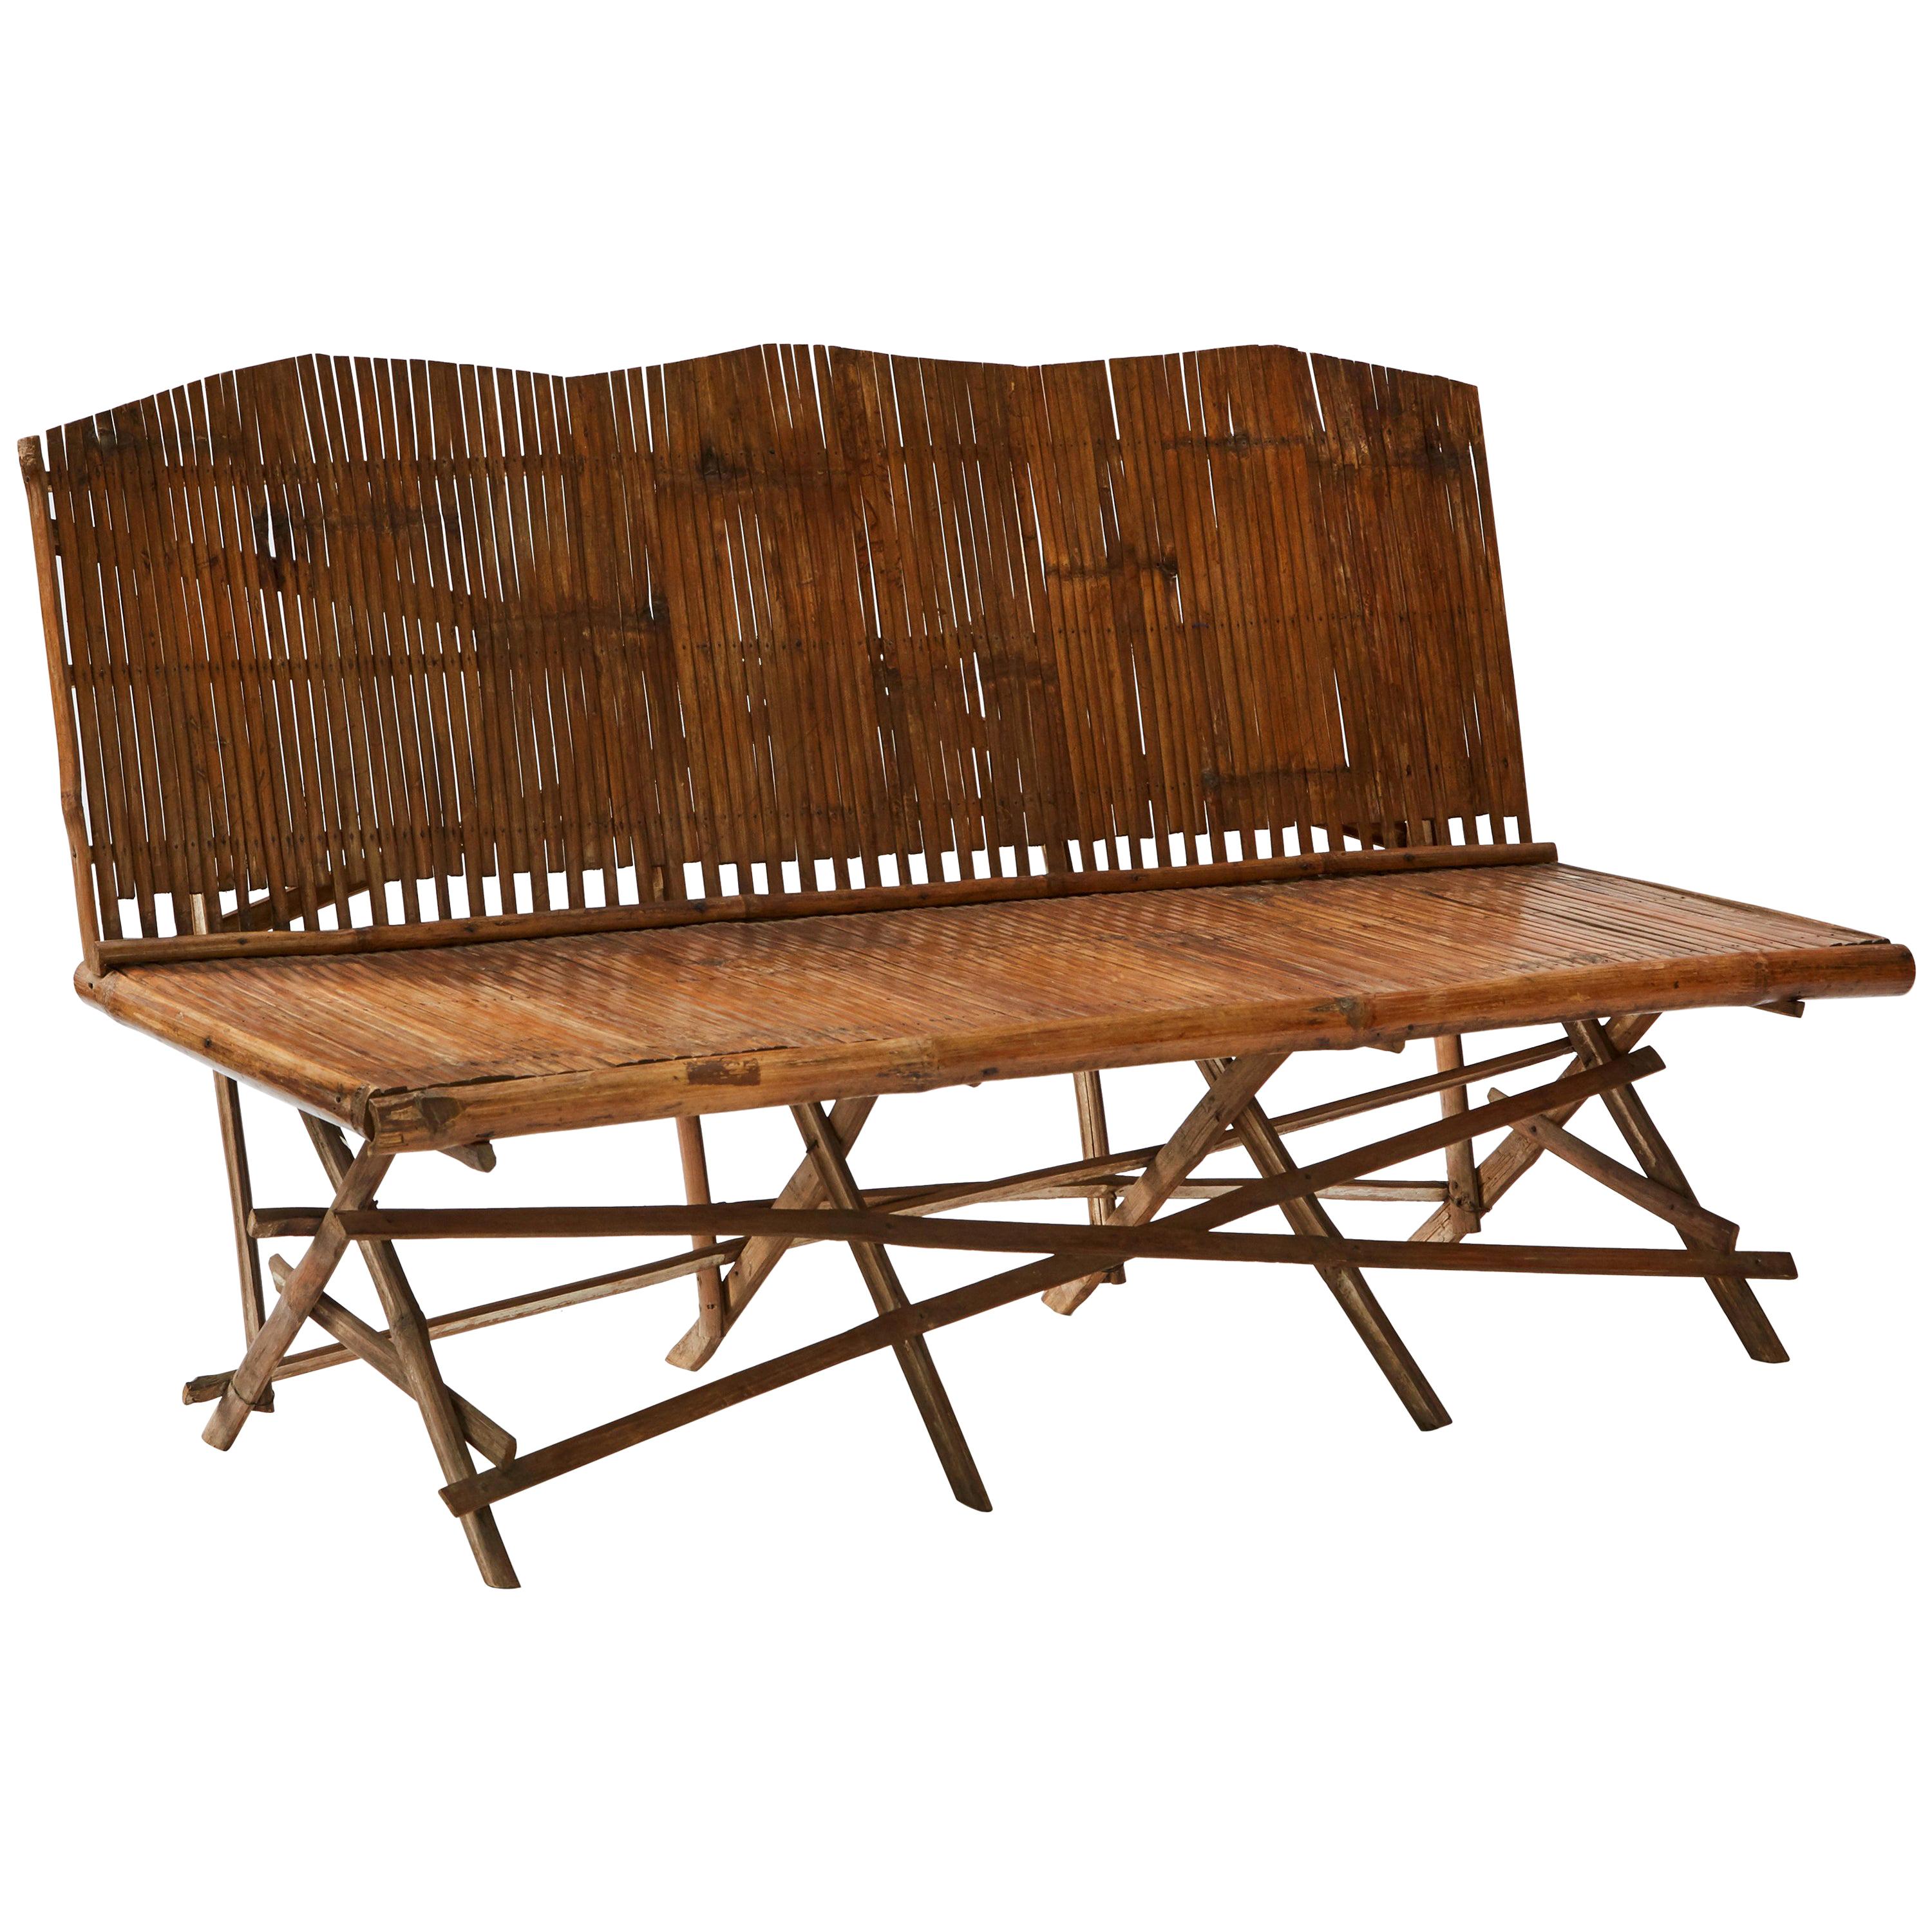 1920s English Bamboo Slatted Country Bench For Sale